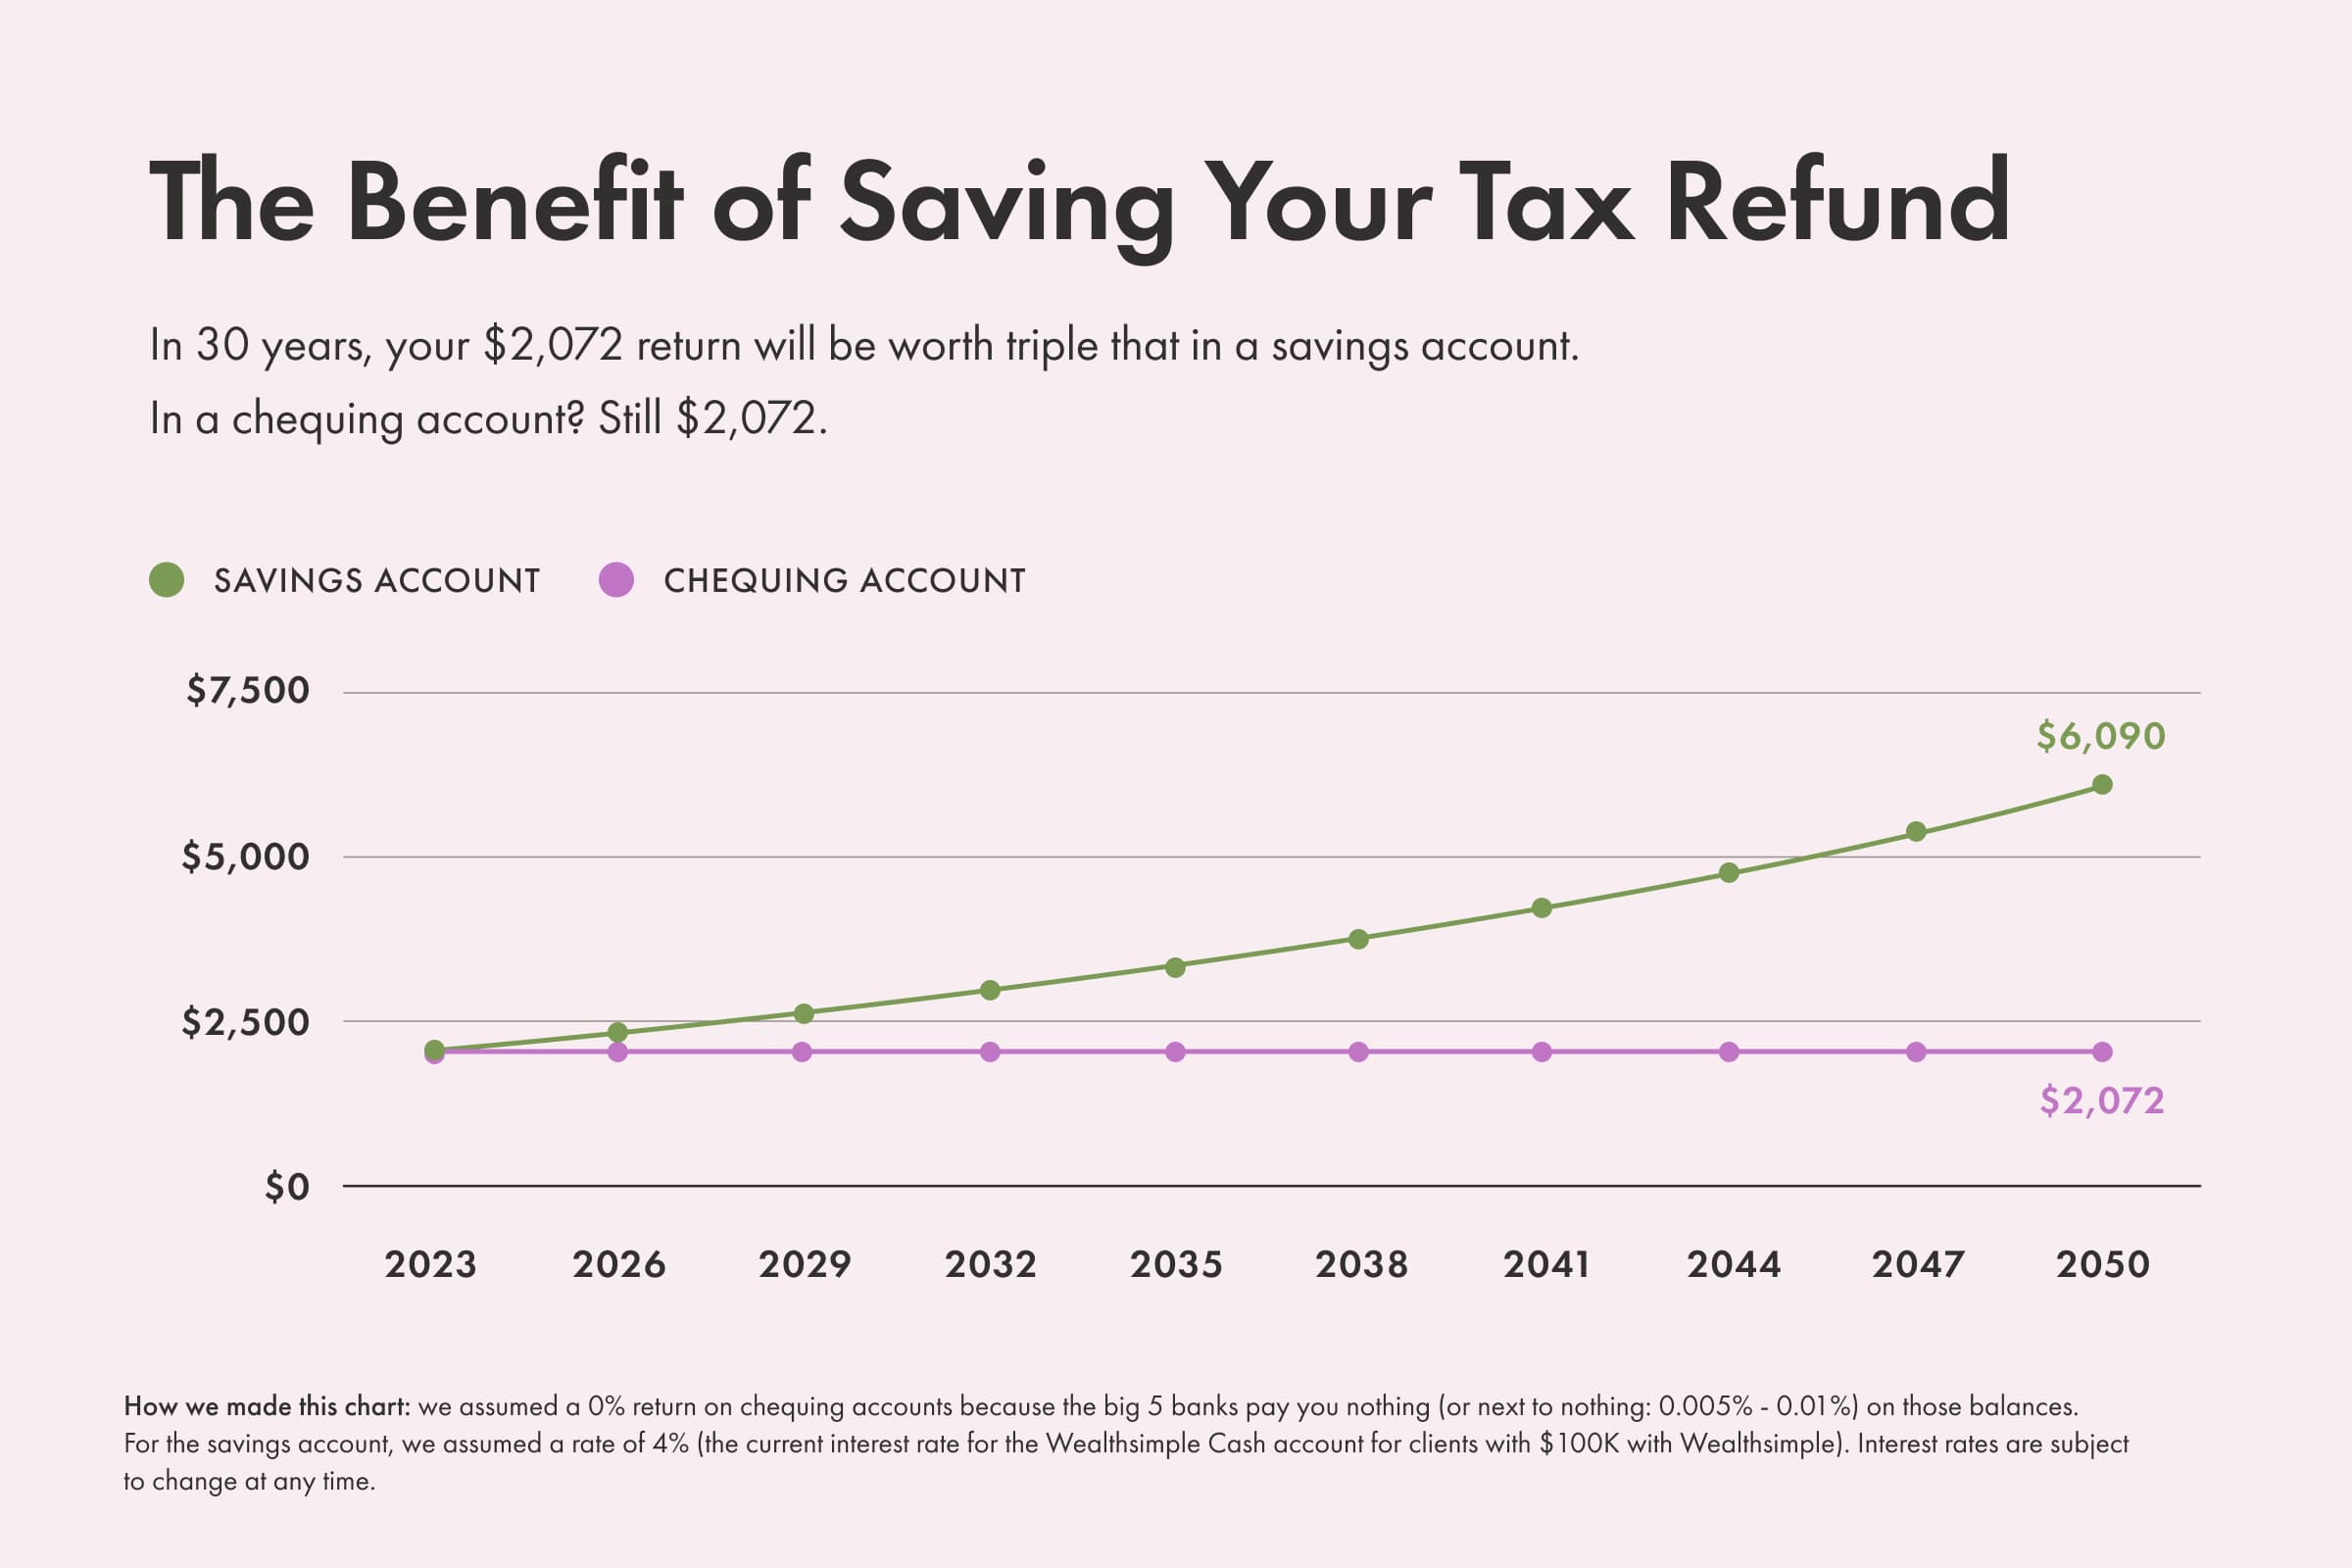 Instead of putting your tax refund in a chequing account with 0% interest, you can put it in a high-interest savings account — and watch it grow.